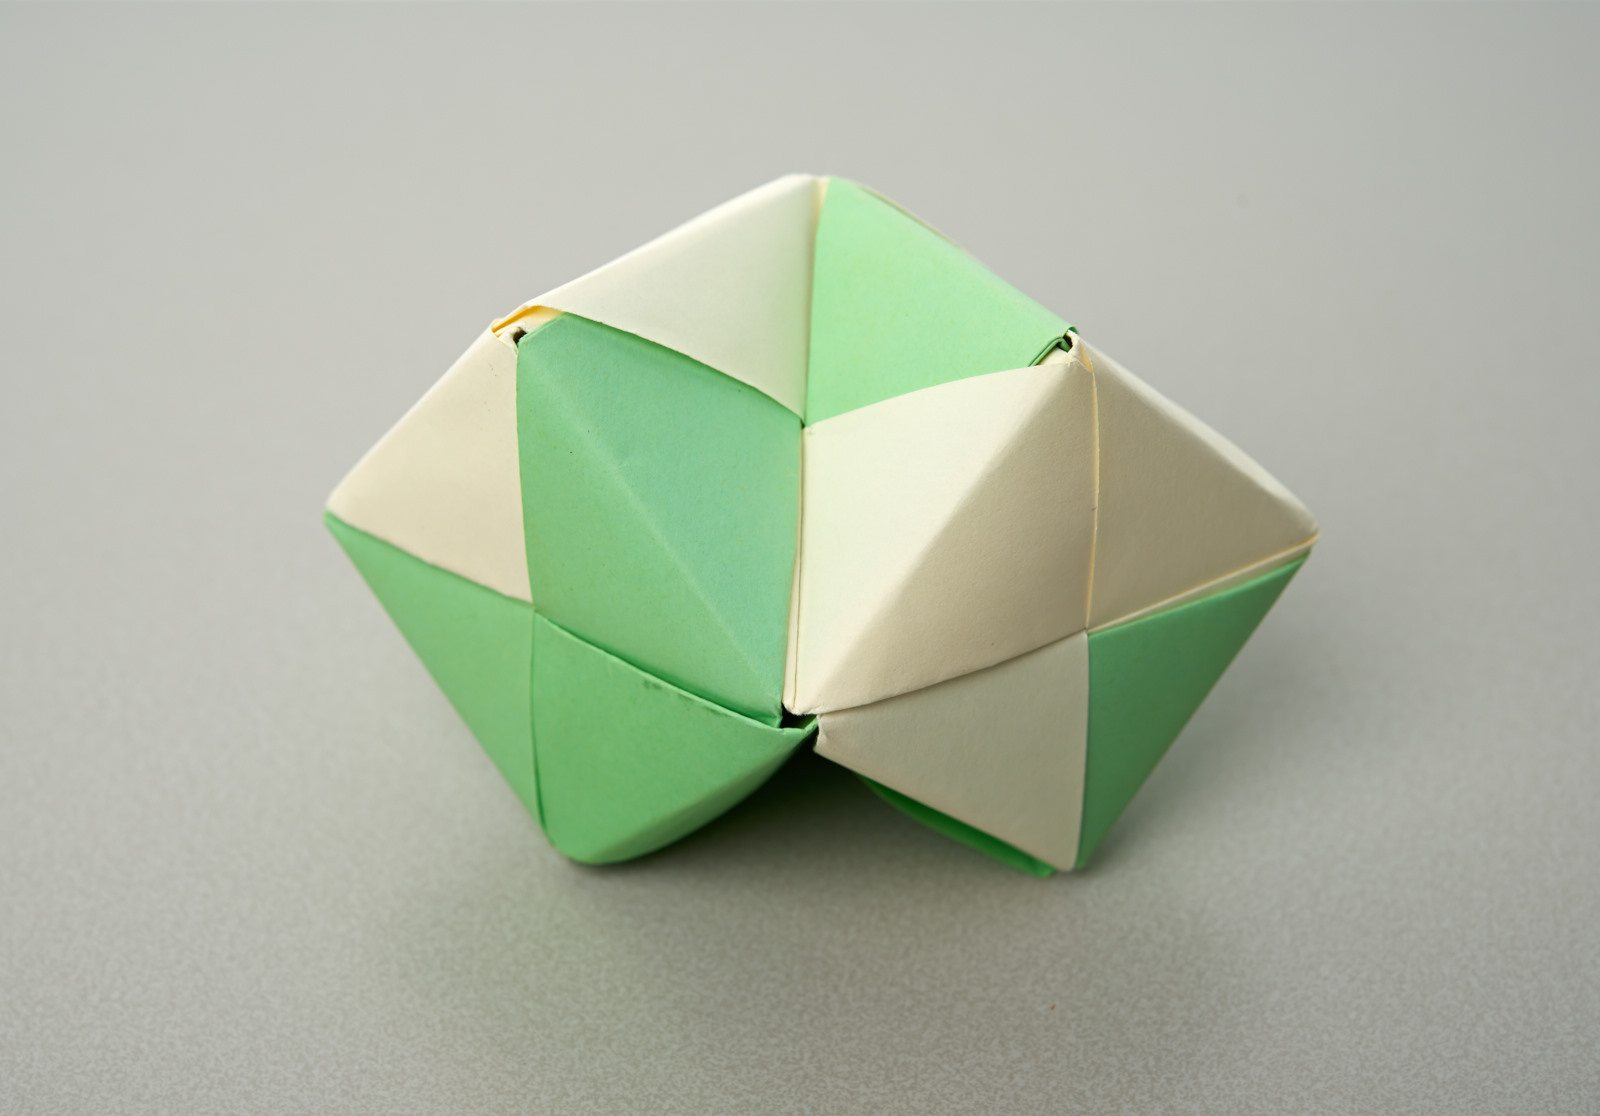 Connected cubes